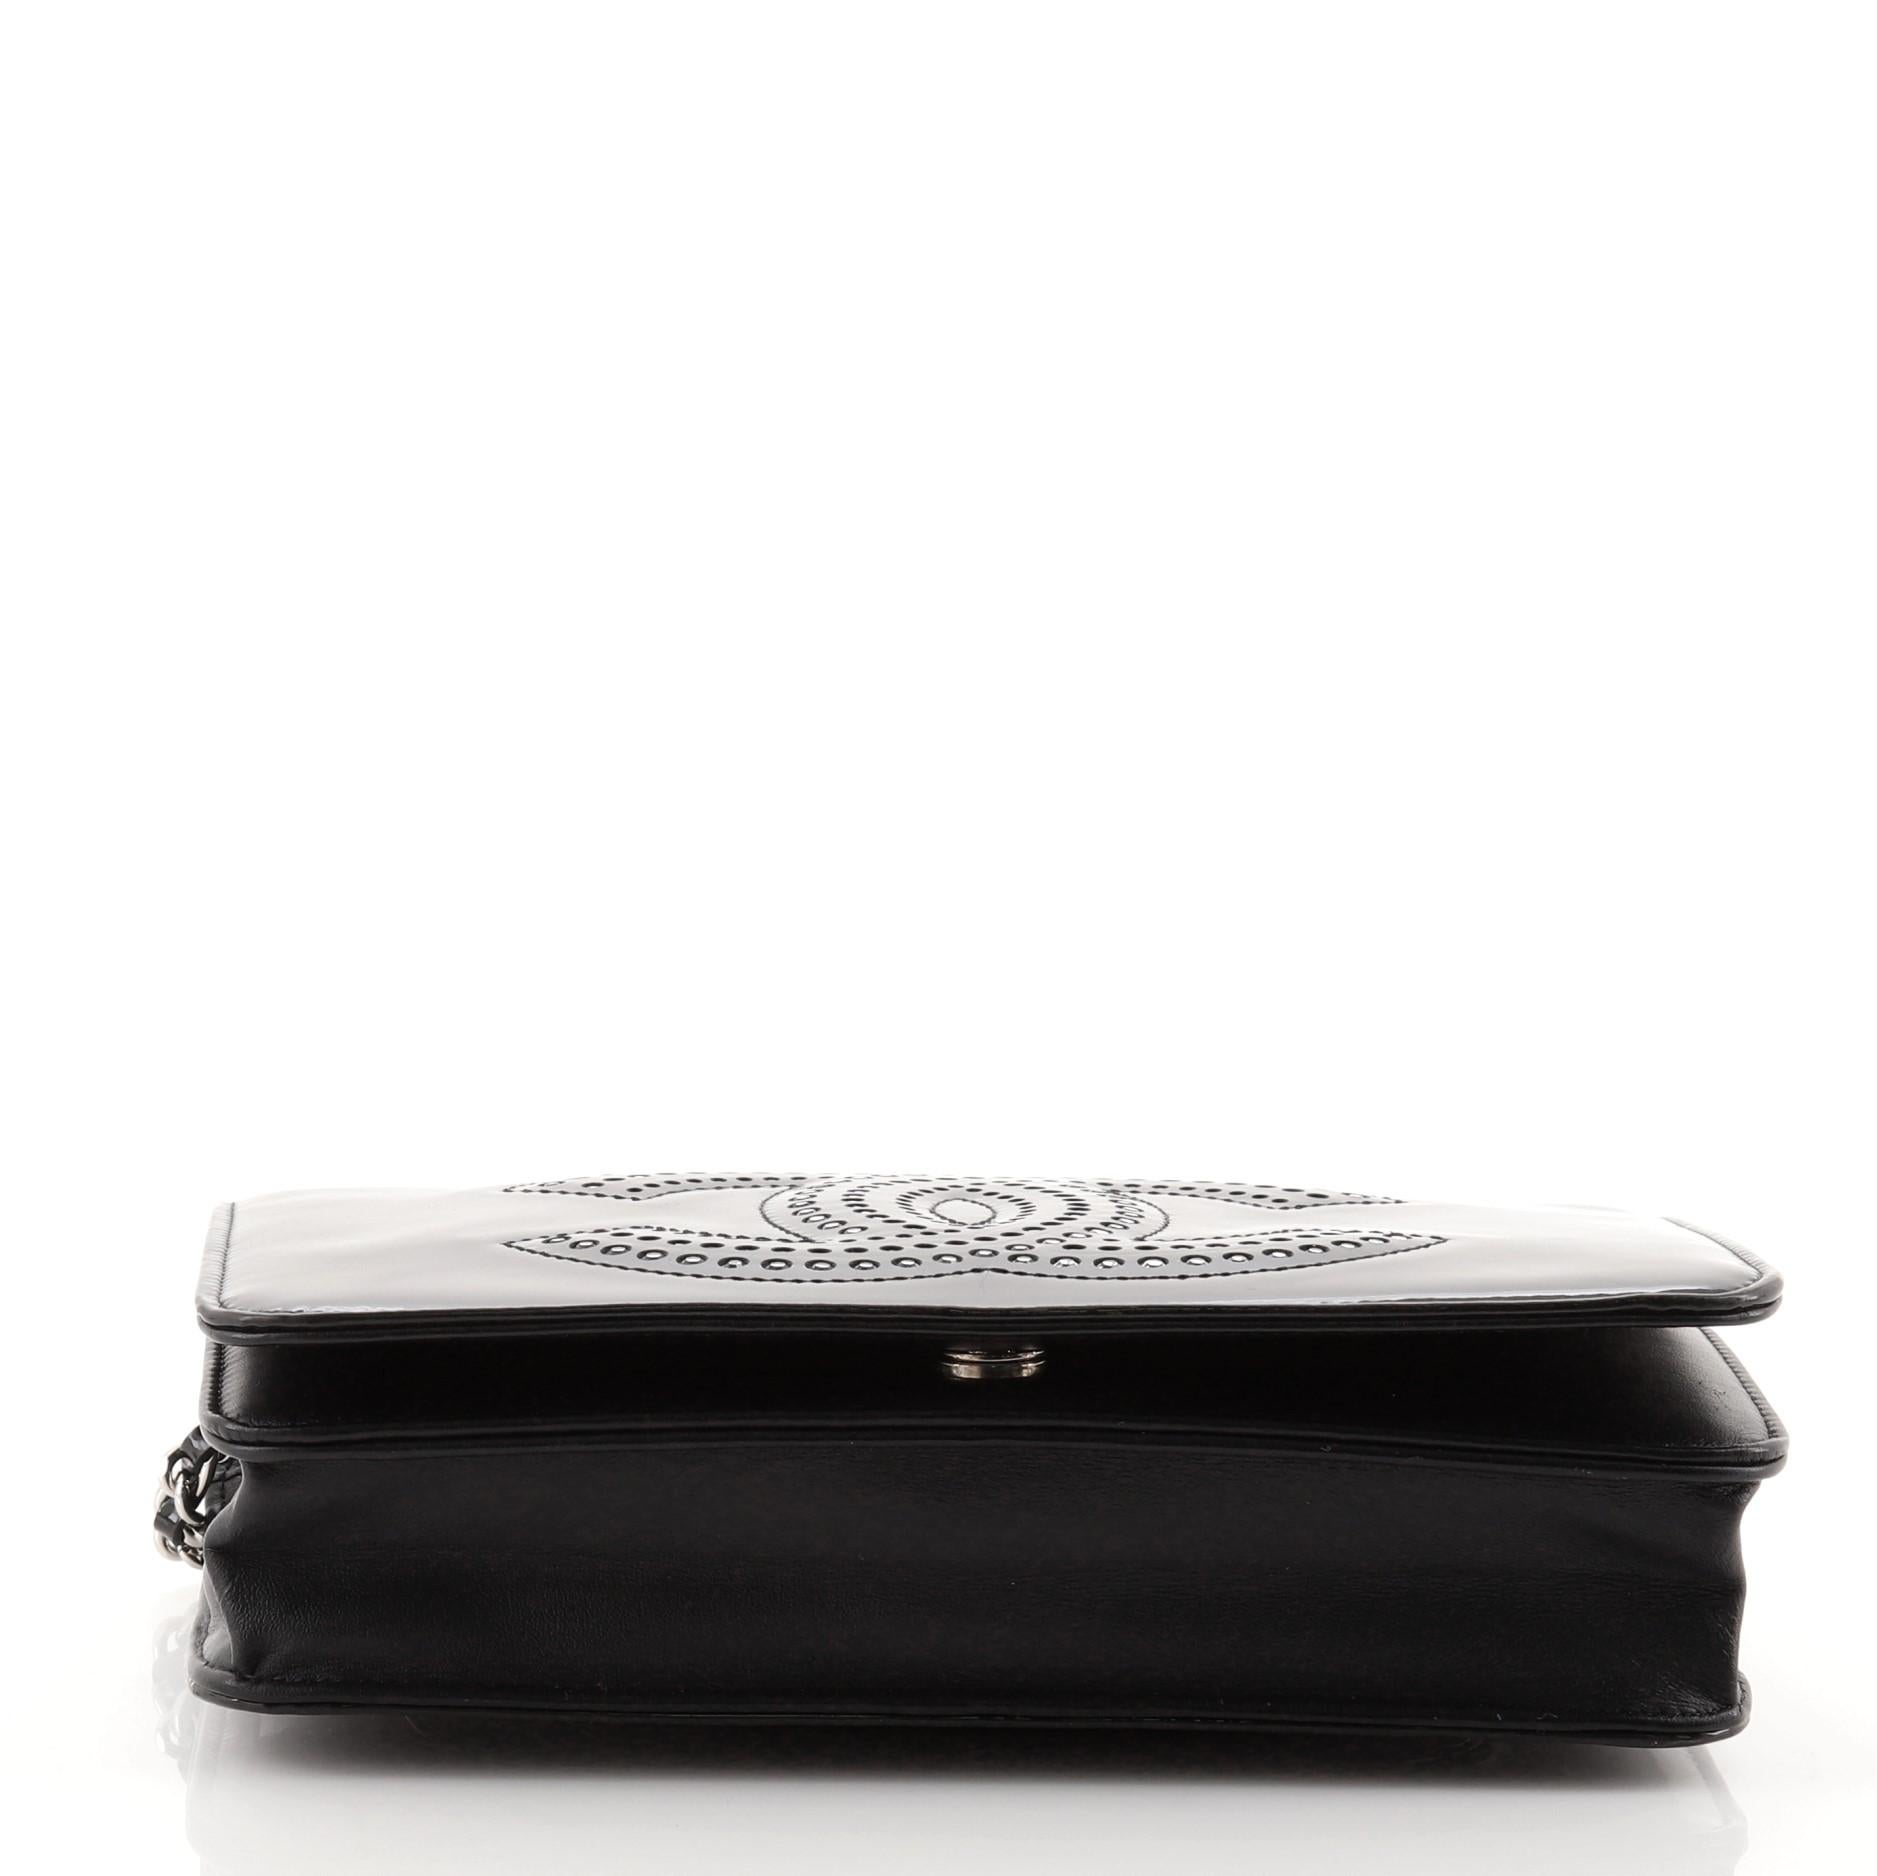 Black Chanel CC Wallet on Chain Strass Embellished Patent